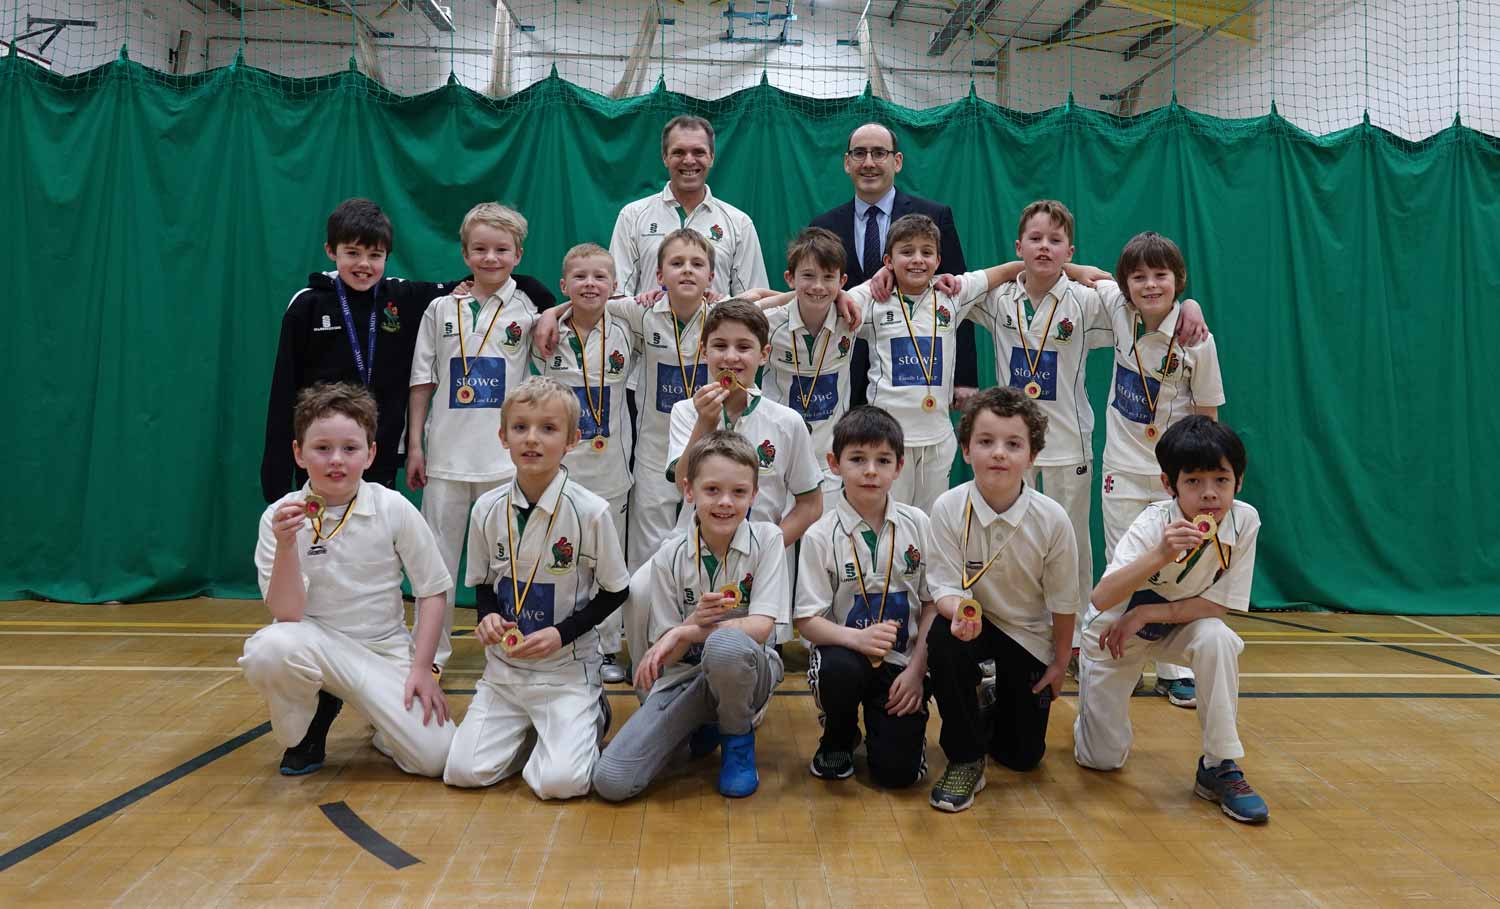 ndoor League Champions! Stowe Family Law CEO Charles Hartwell, back right, and Harrogate U9’s coach Brian Summerson, back left, with the victorious U9’s team sporting their medals